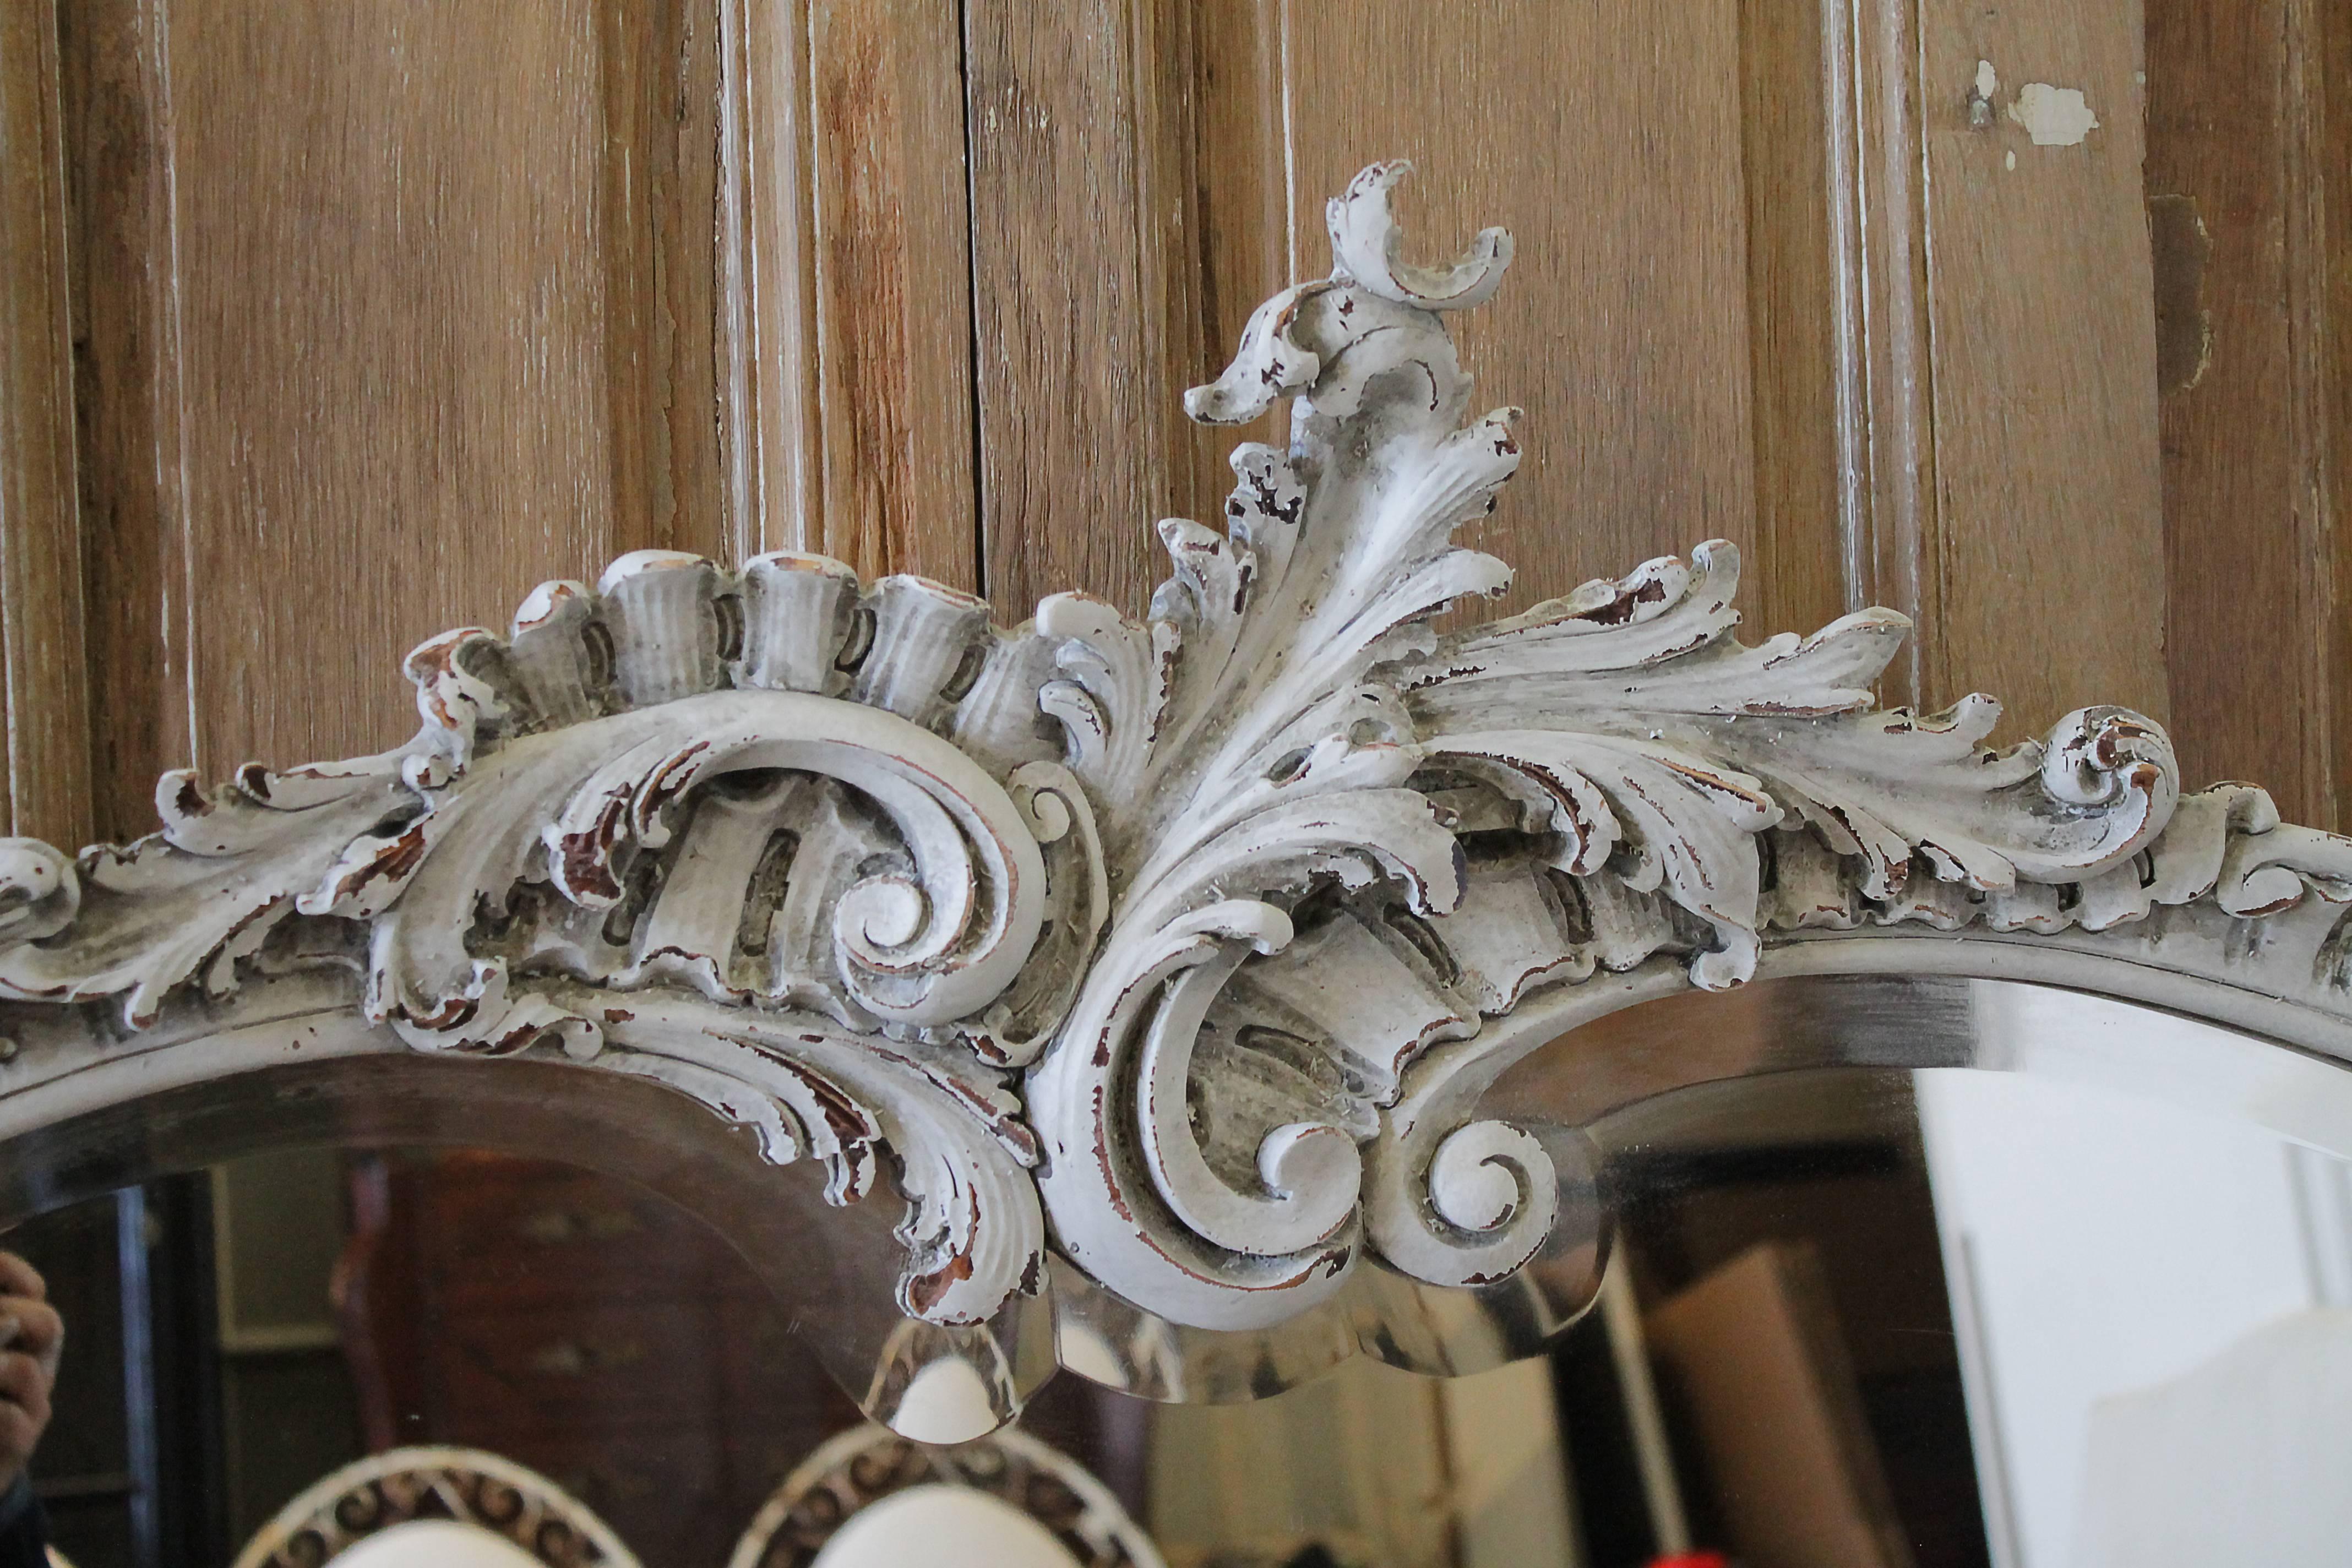 Early 20th century large hand-carved French Rococo style mirror
Painted in an oyster white, with a subtle hue of grey tones, with light distressed edges, and antique glazed patina.
Measures: 70